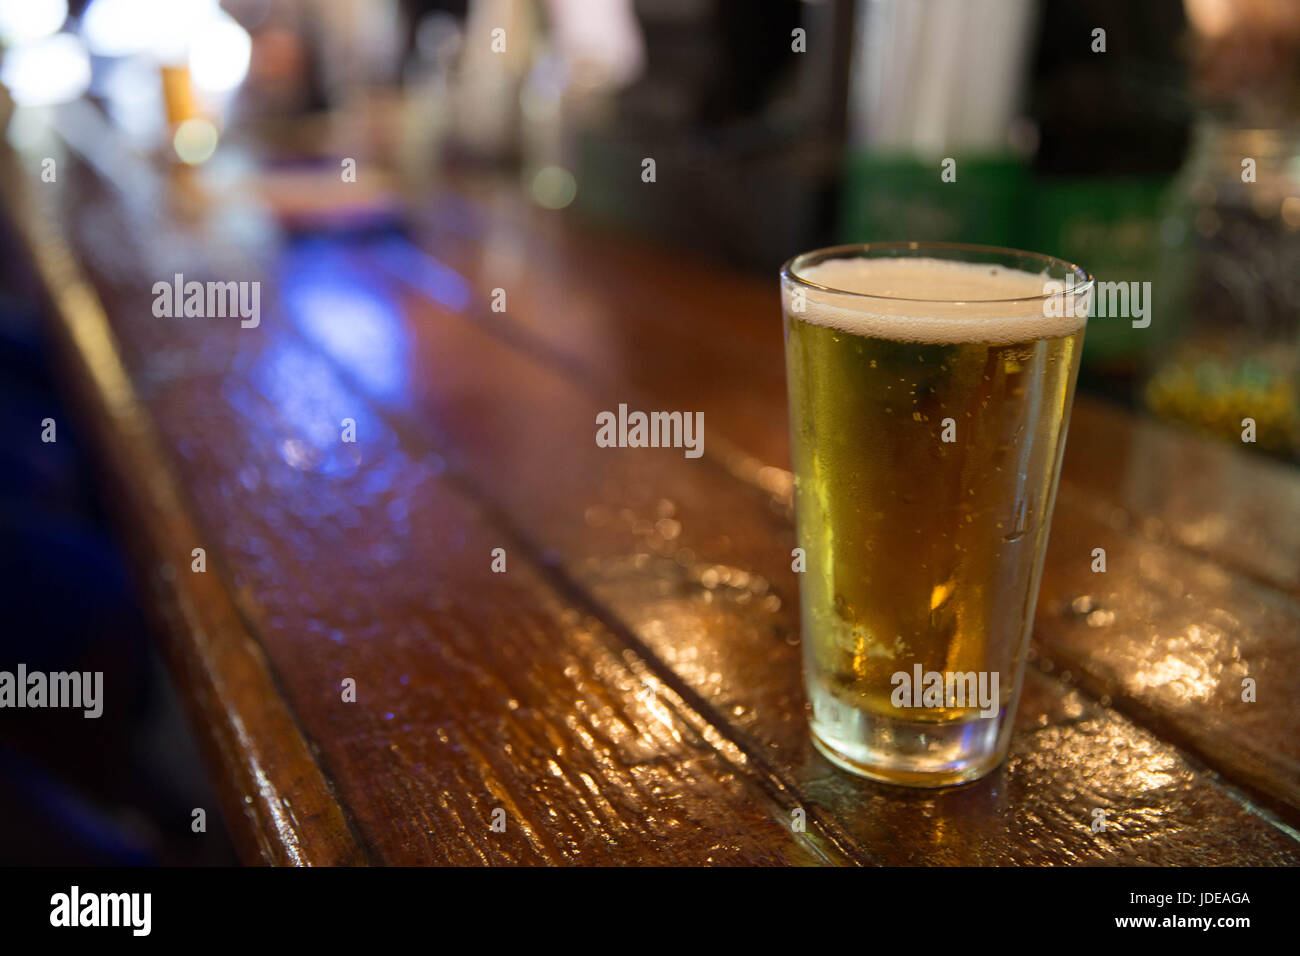 Pint of Beer on a Bar Stock Photo